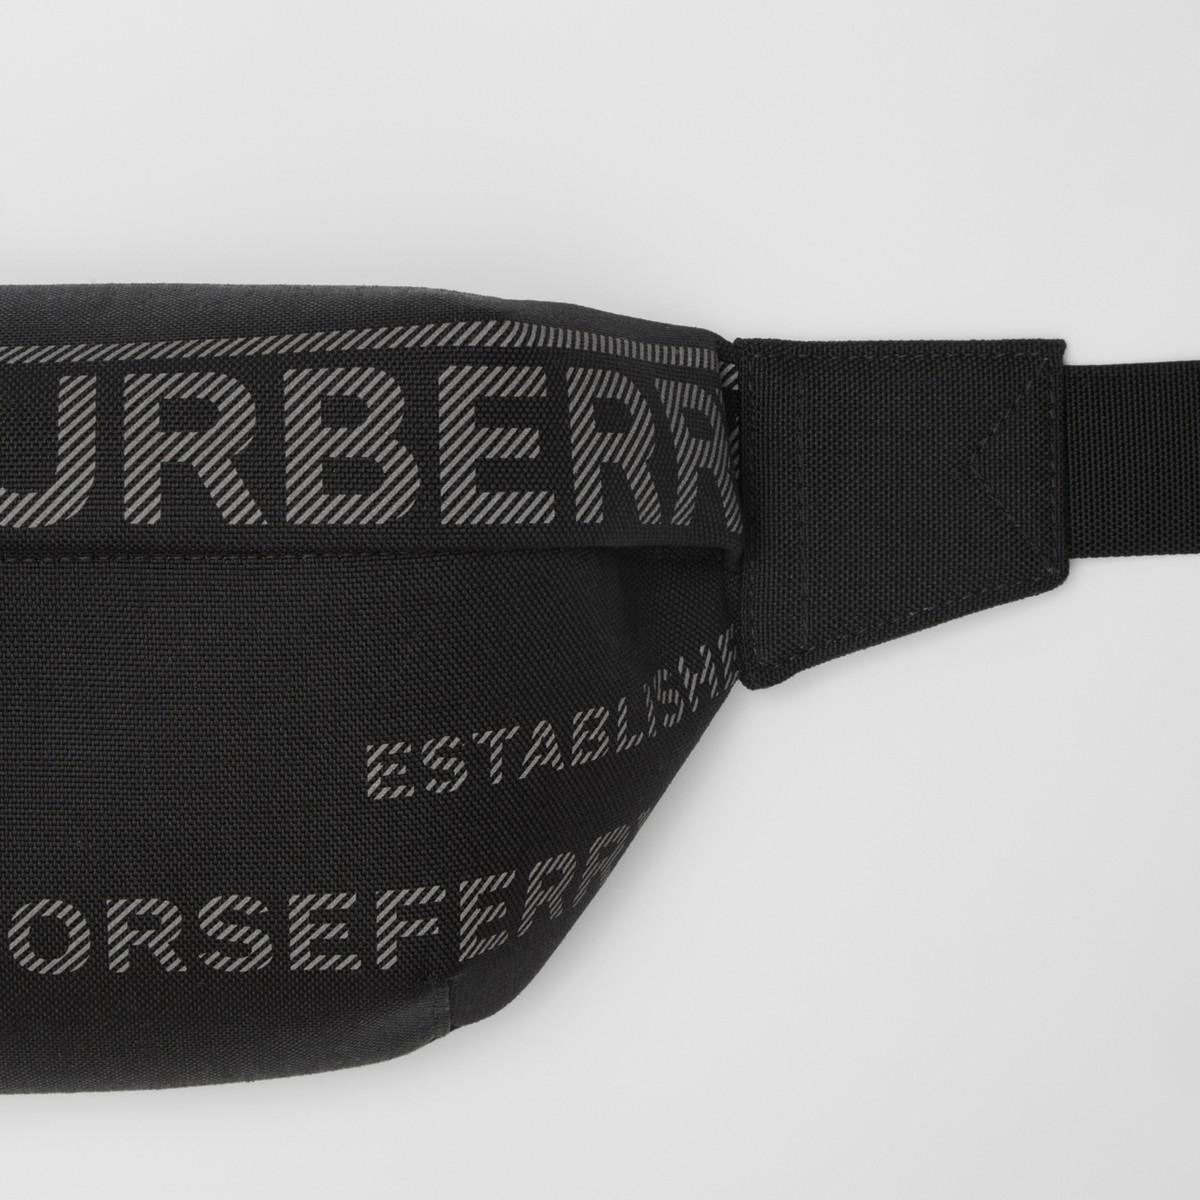 Burberry Horseferry Print Cotton Canvas Bum Bag Grey/Black in Cotton Canvas  with Silver-tone - GB